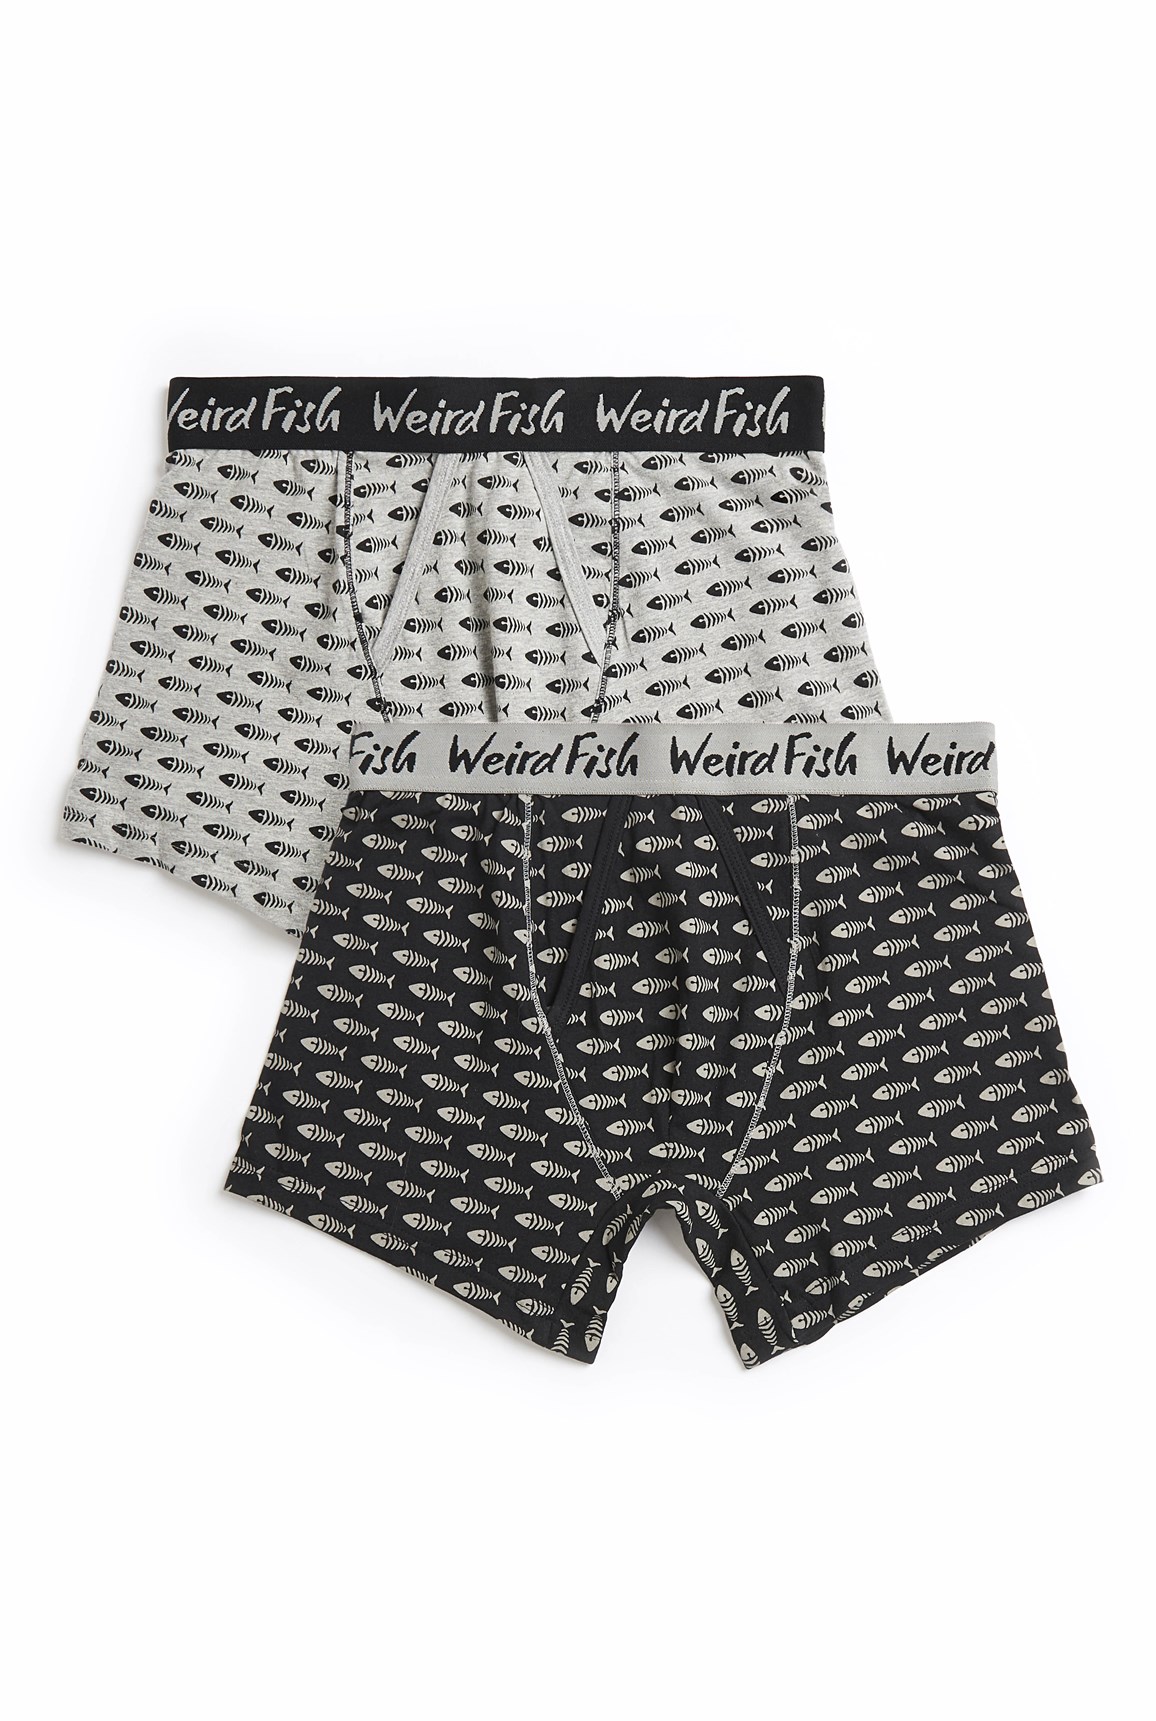 Weird Fish Lyman Boxer Shorts Twin Pack Black Size S